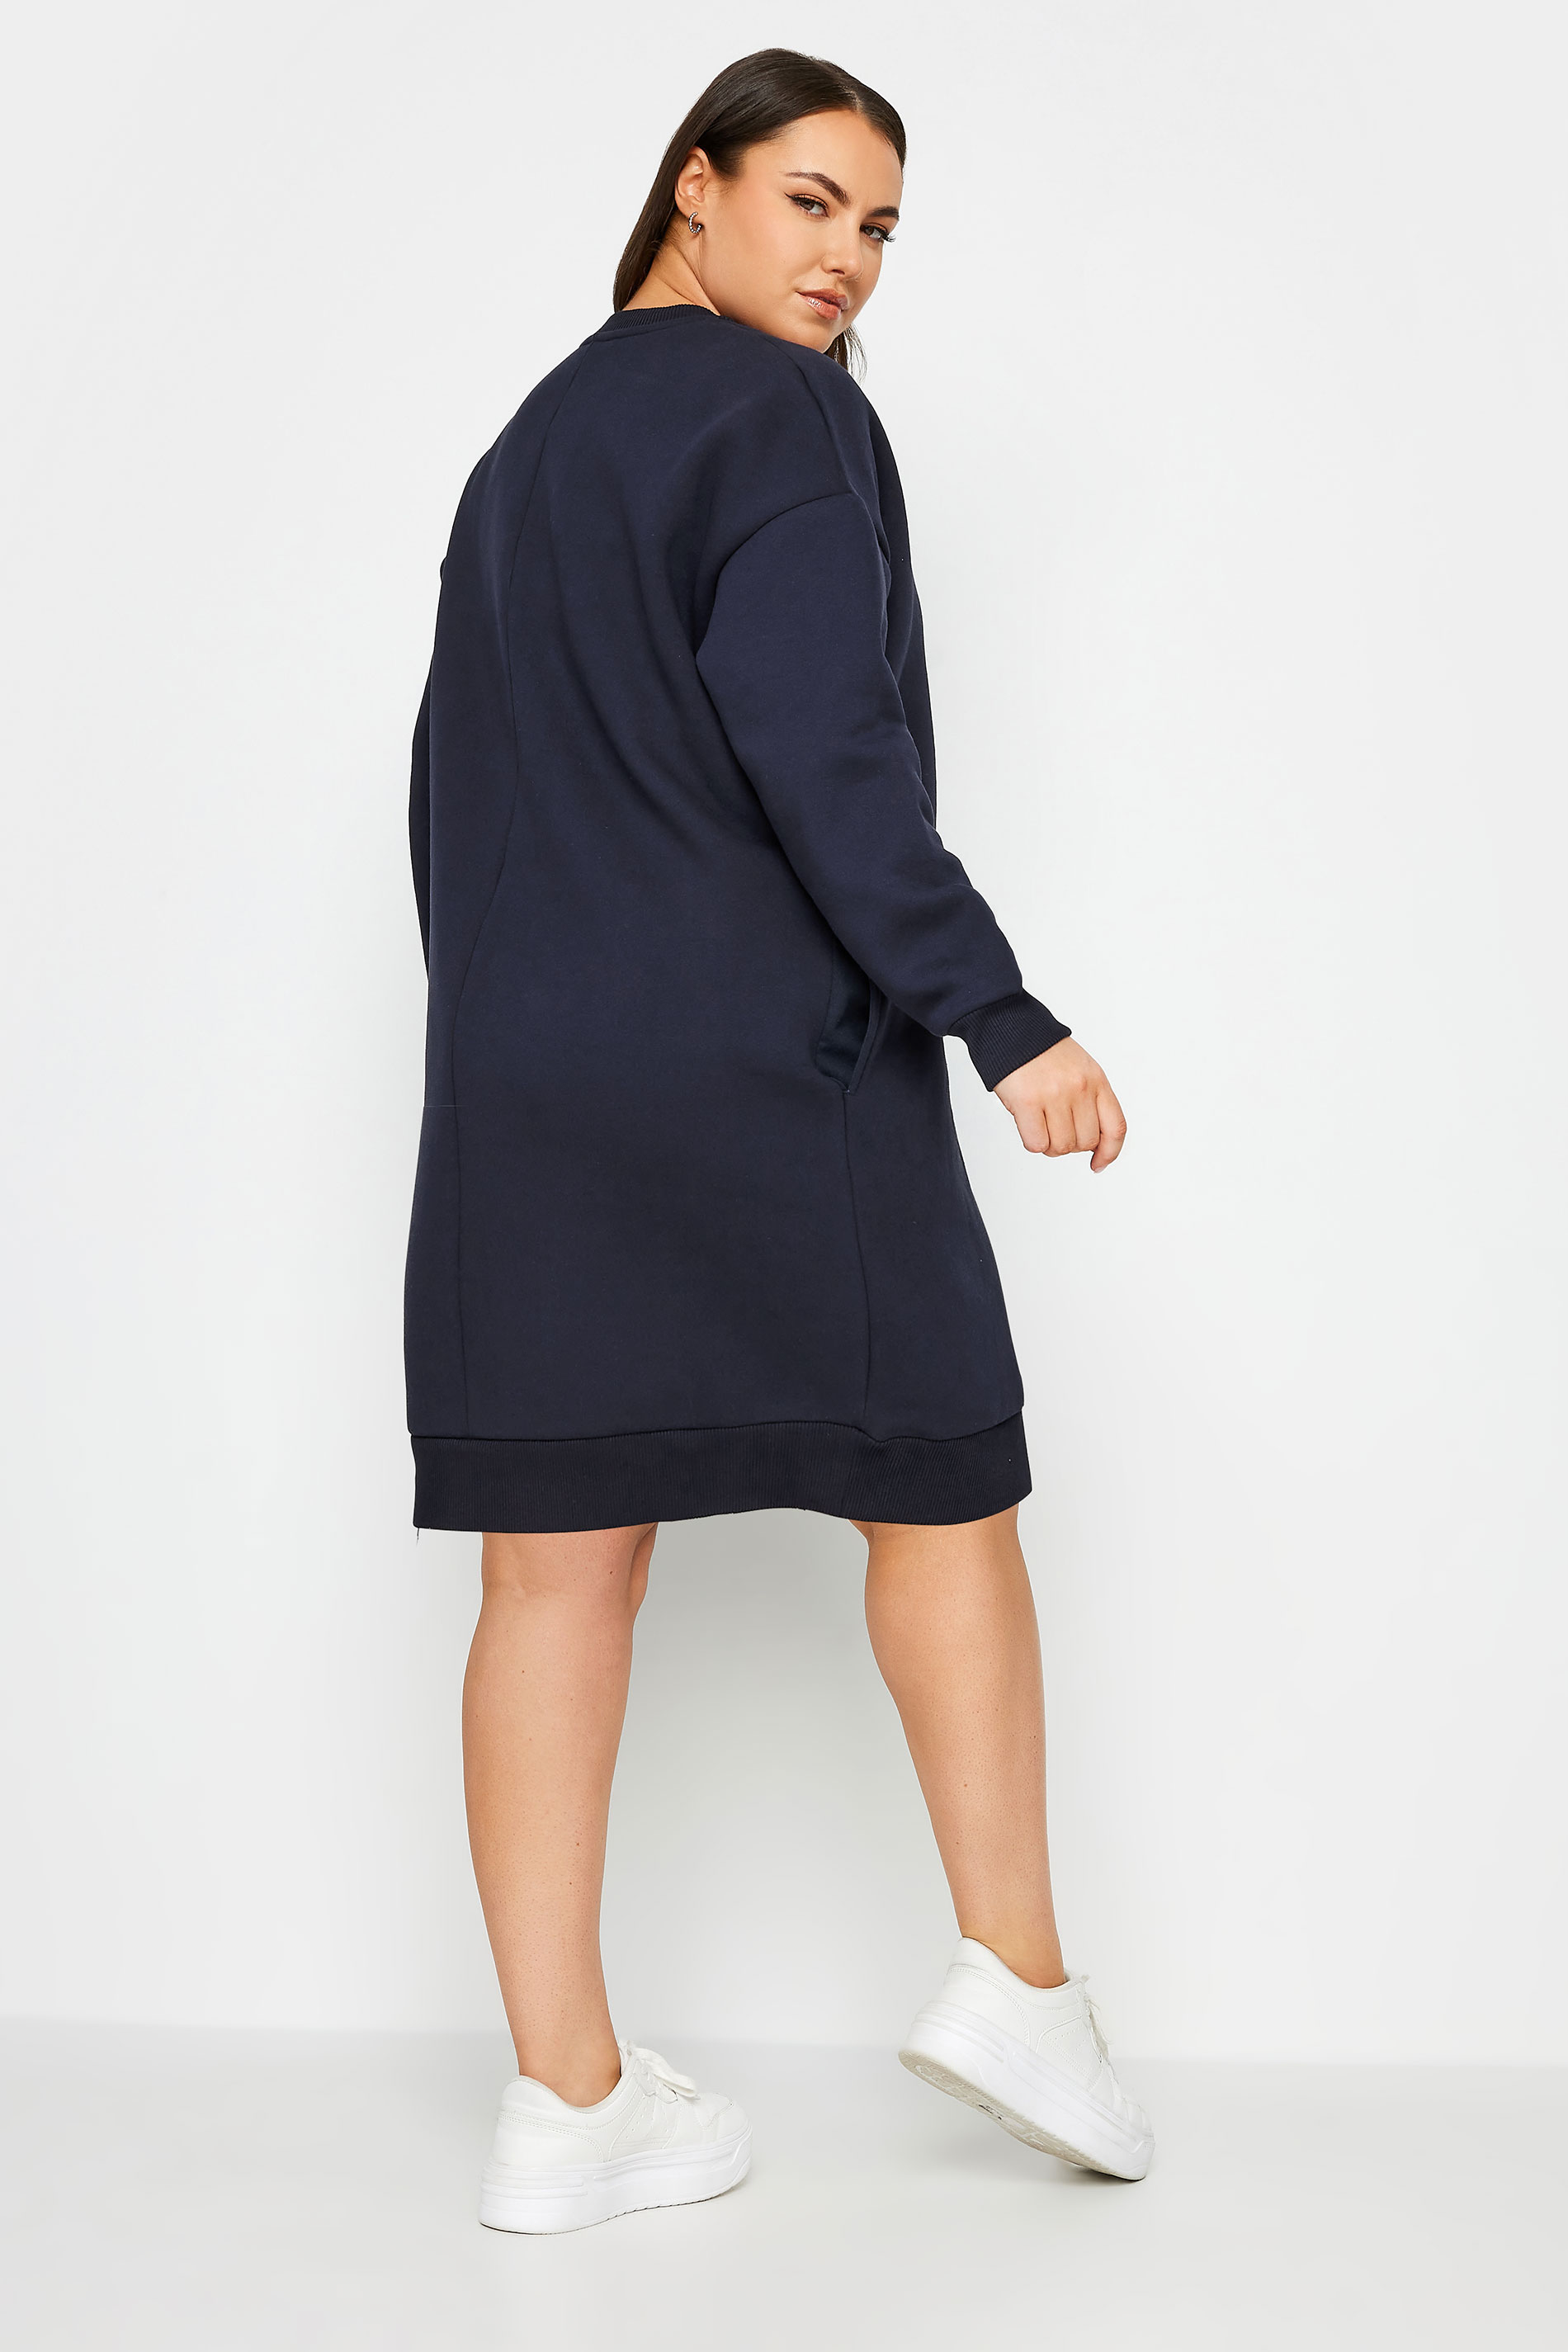 YOURS Plus Size Navy Blue Sweatshirt Dress | Yours Clothing 3